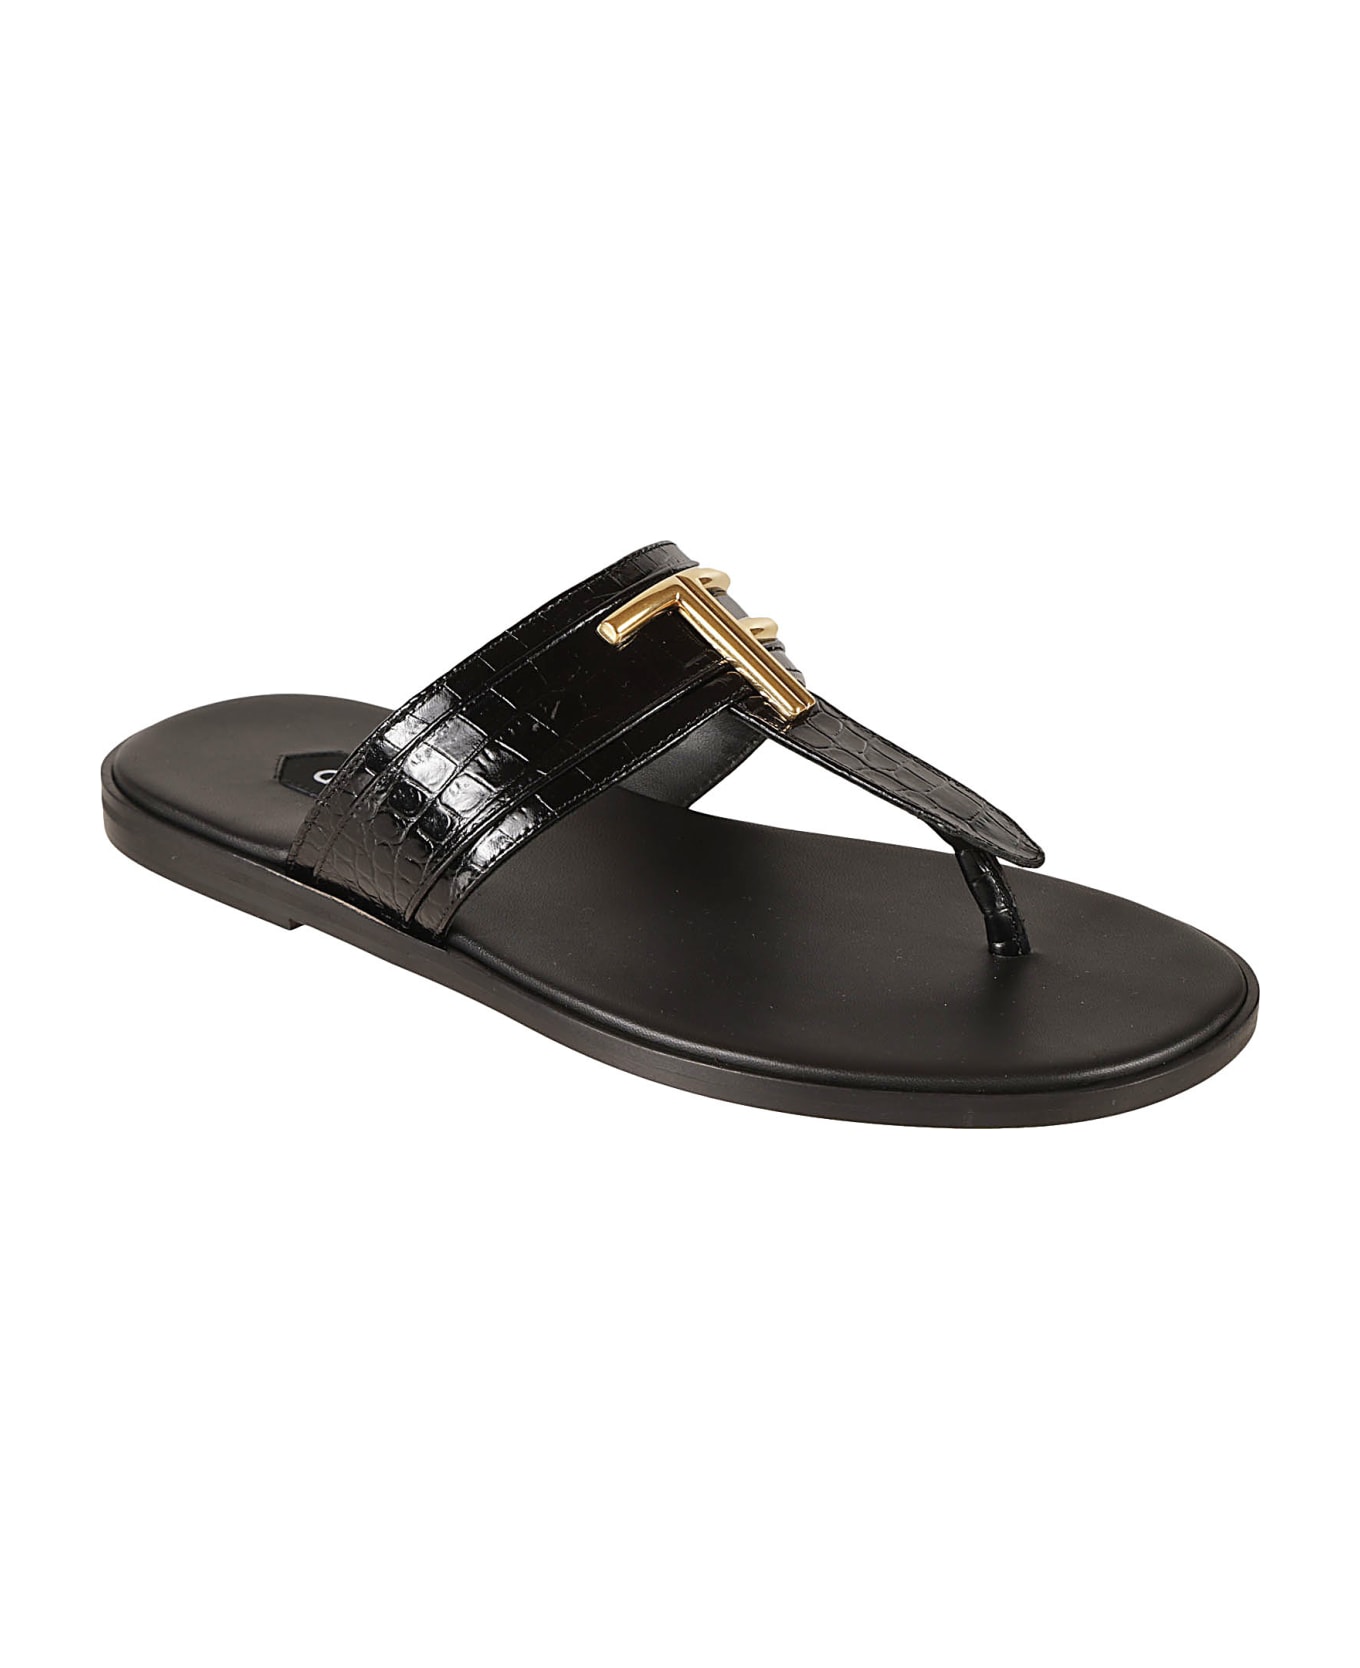 Tom Ford Croco Embossed T Plaque Sandals - Black その他各種シューズ